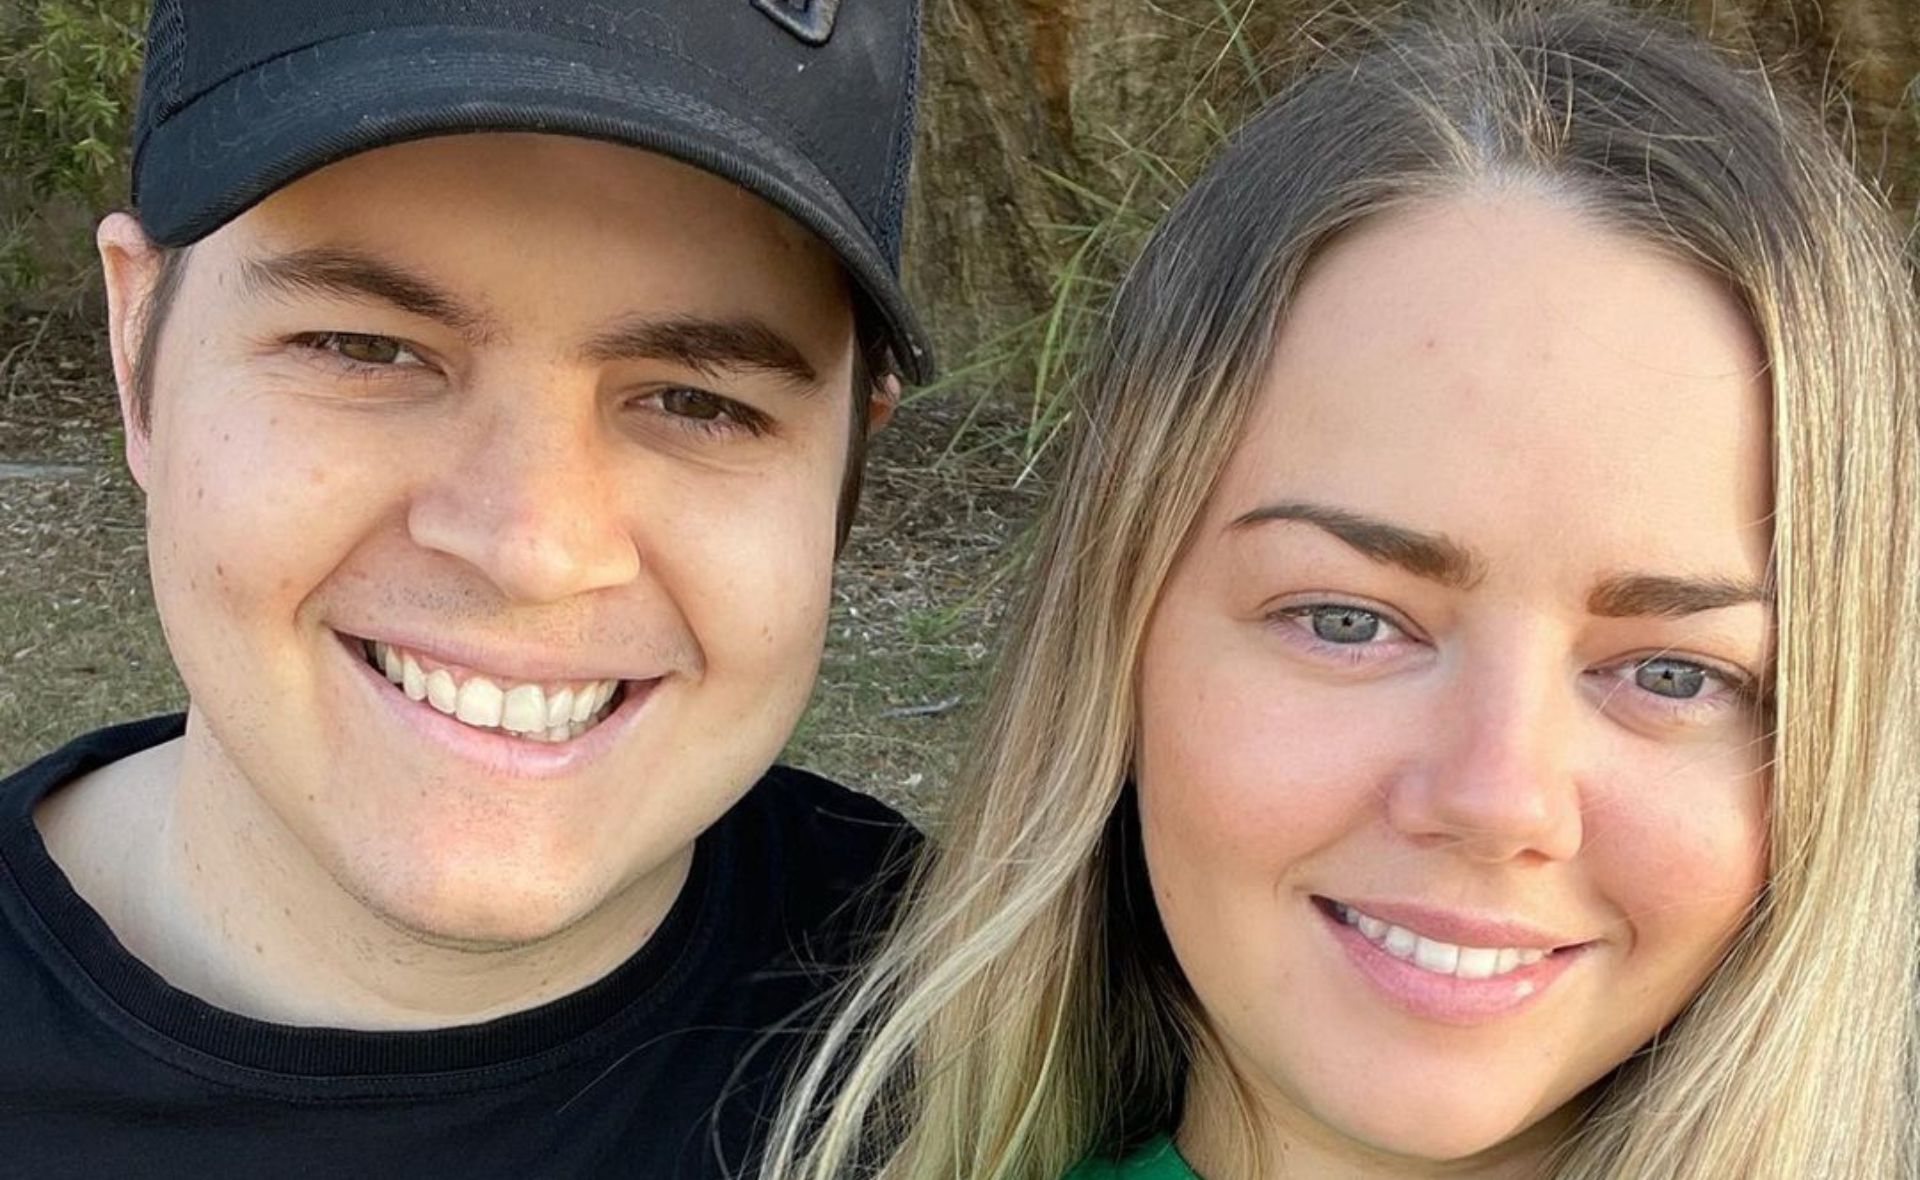 “She made me struggle for words”: Johnny Ruffo recalls the moment he first laid eyes on his girlfriend Tahnee Sims